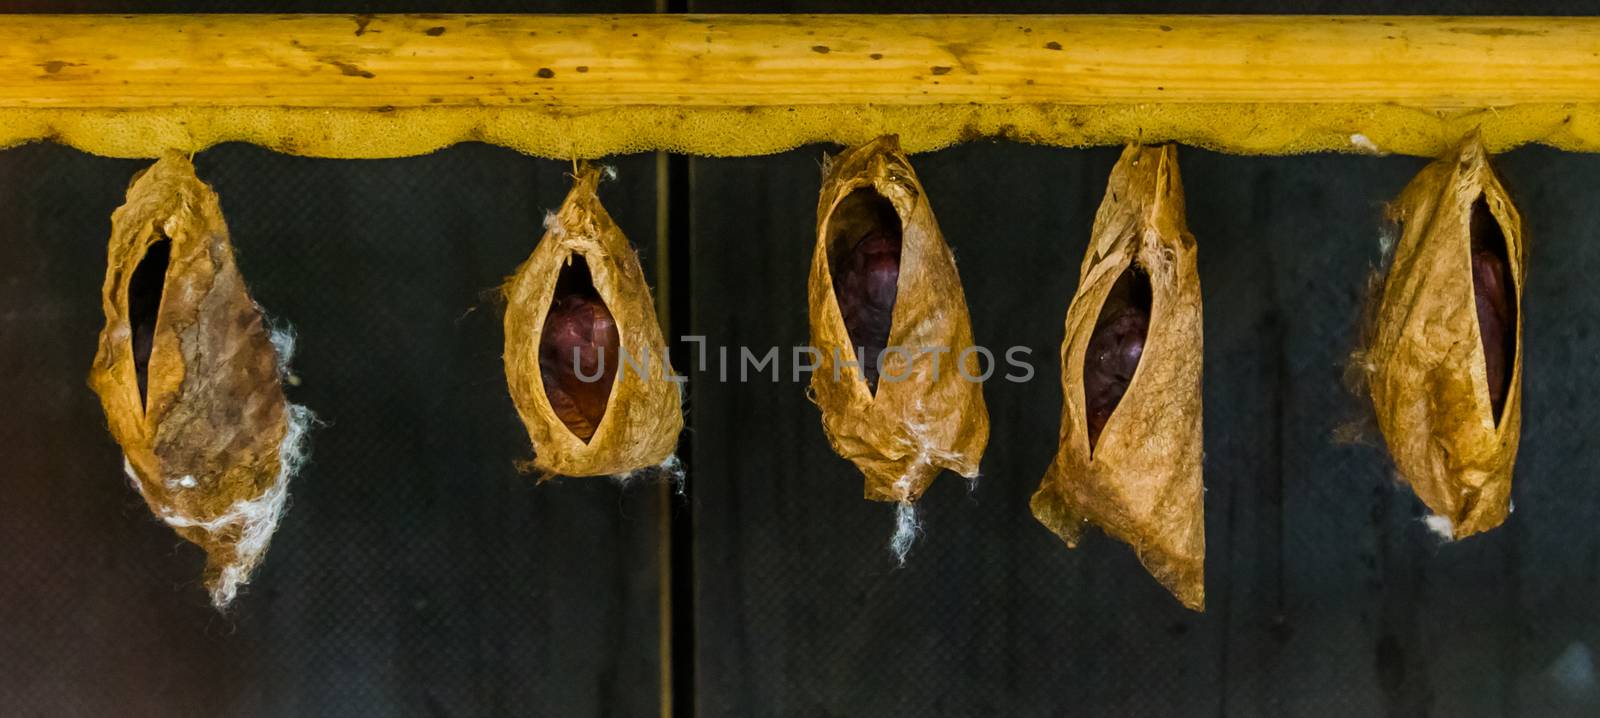 large butterfly cocoons of a tropical specie, insects undergoing metamorphosis by charlottebleijenberg